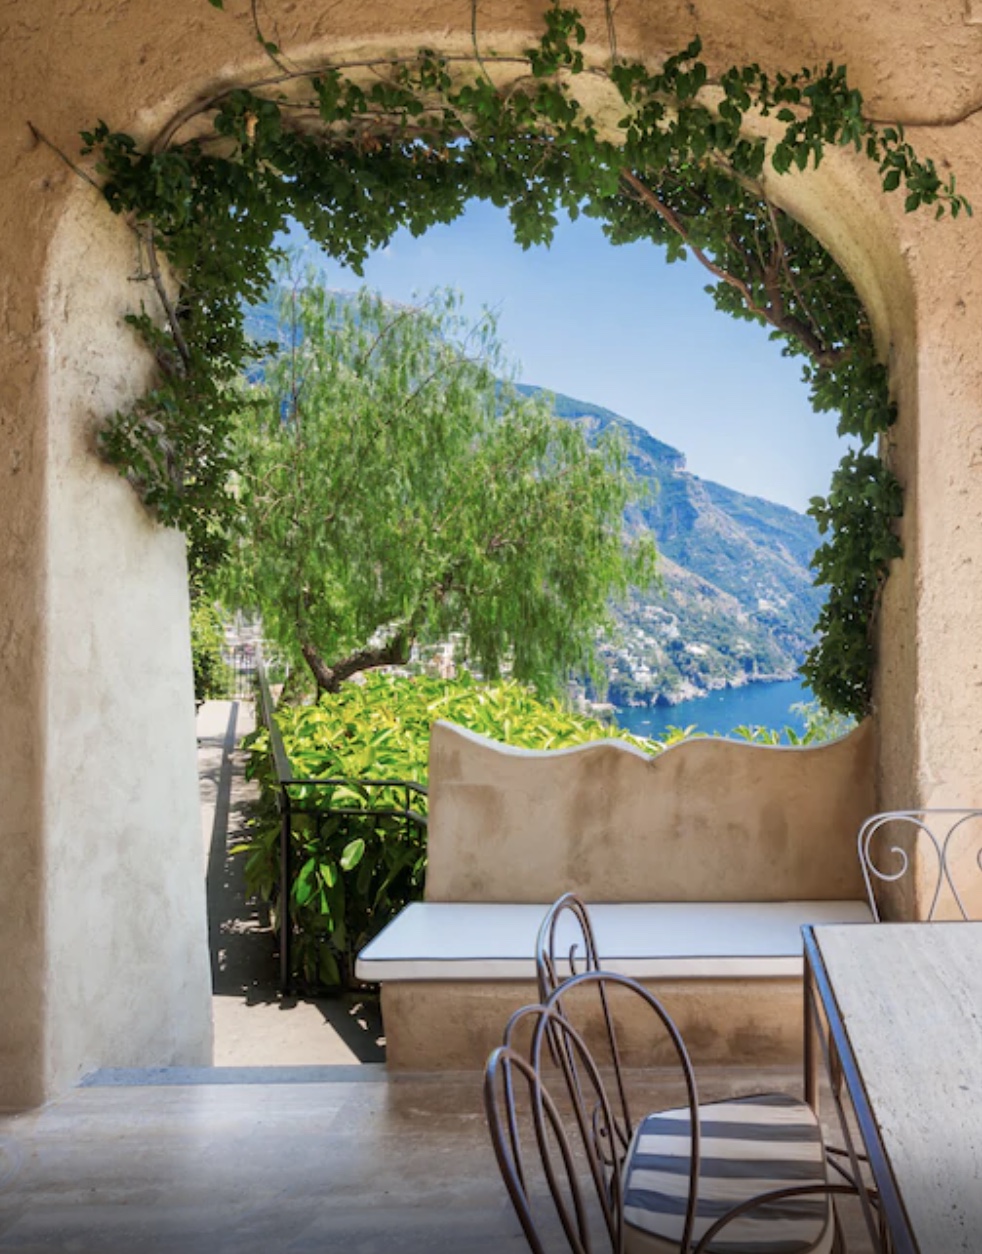 Best hotels in positano with a view